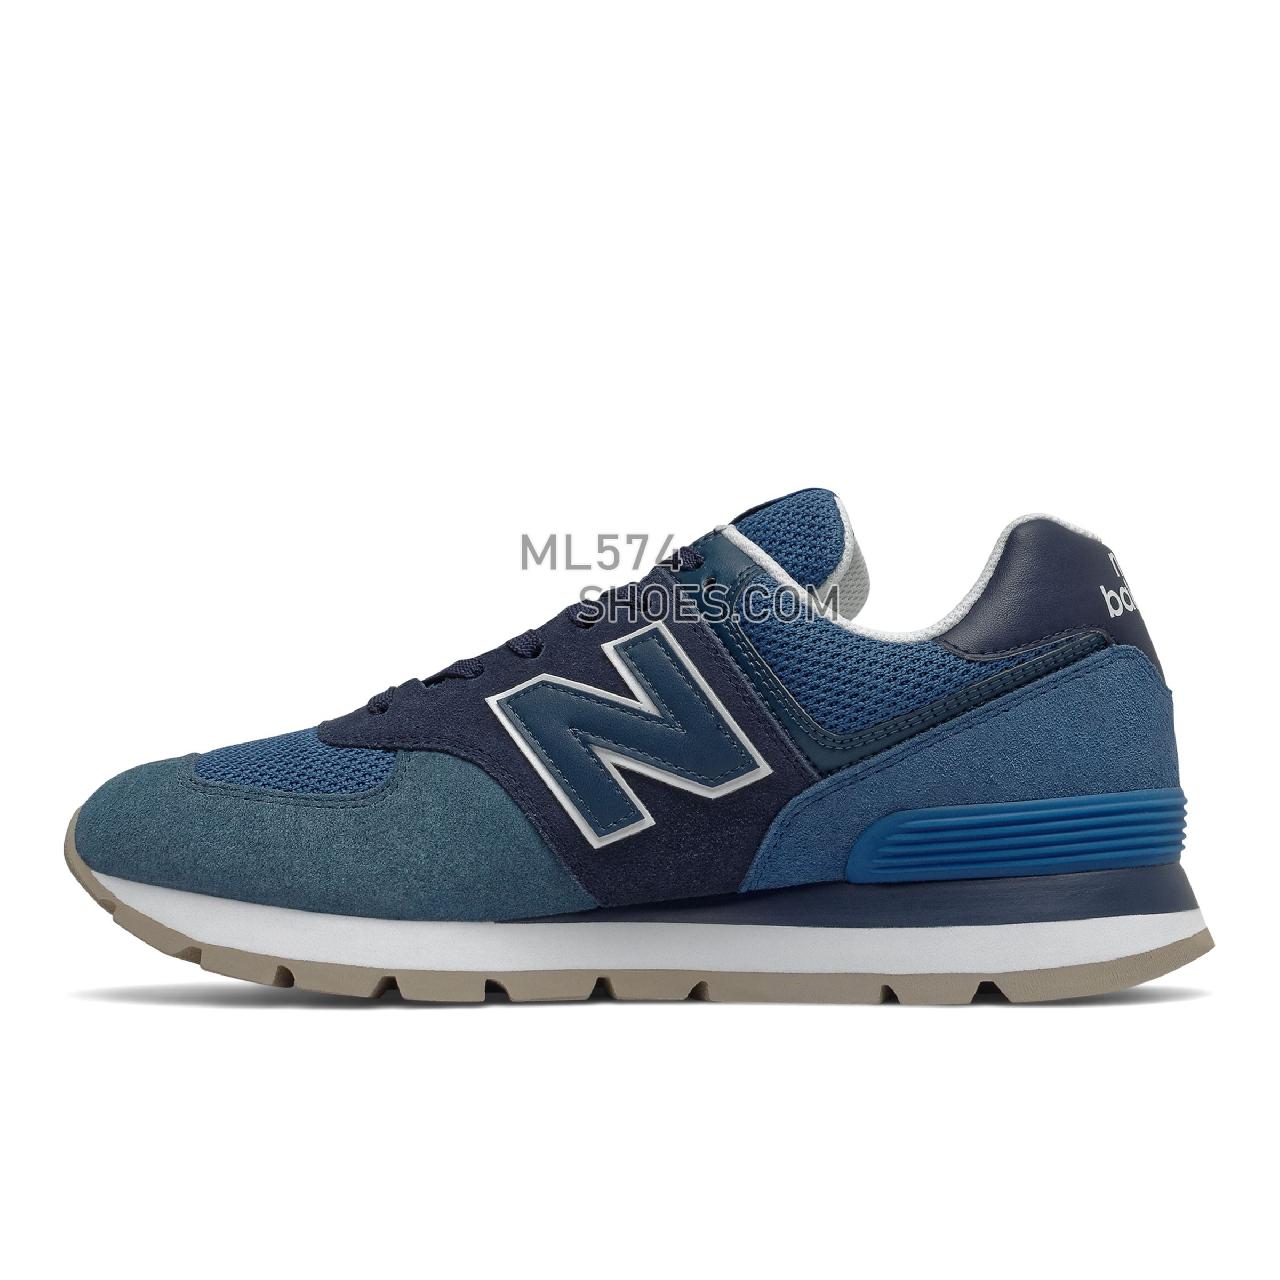 New Balance 574 Rugged - Men's Classic Sneakers - Natural Indigo with Laser Blue - ML574DCL